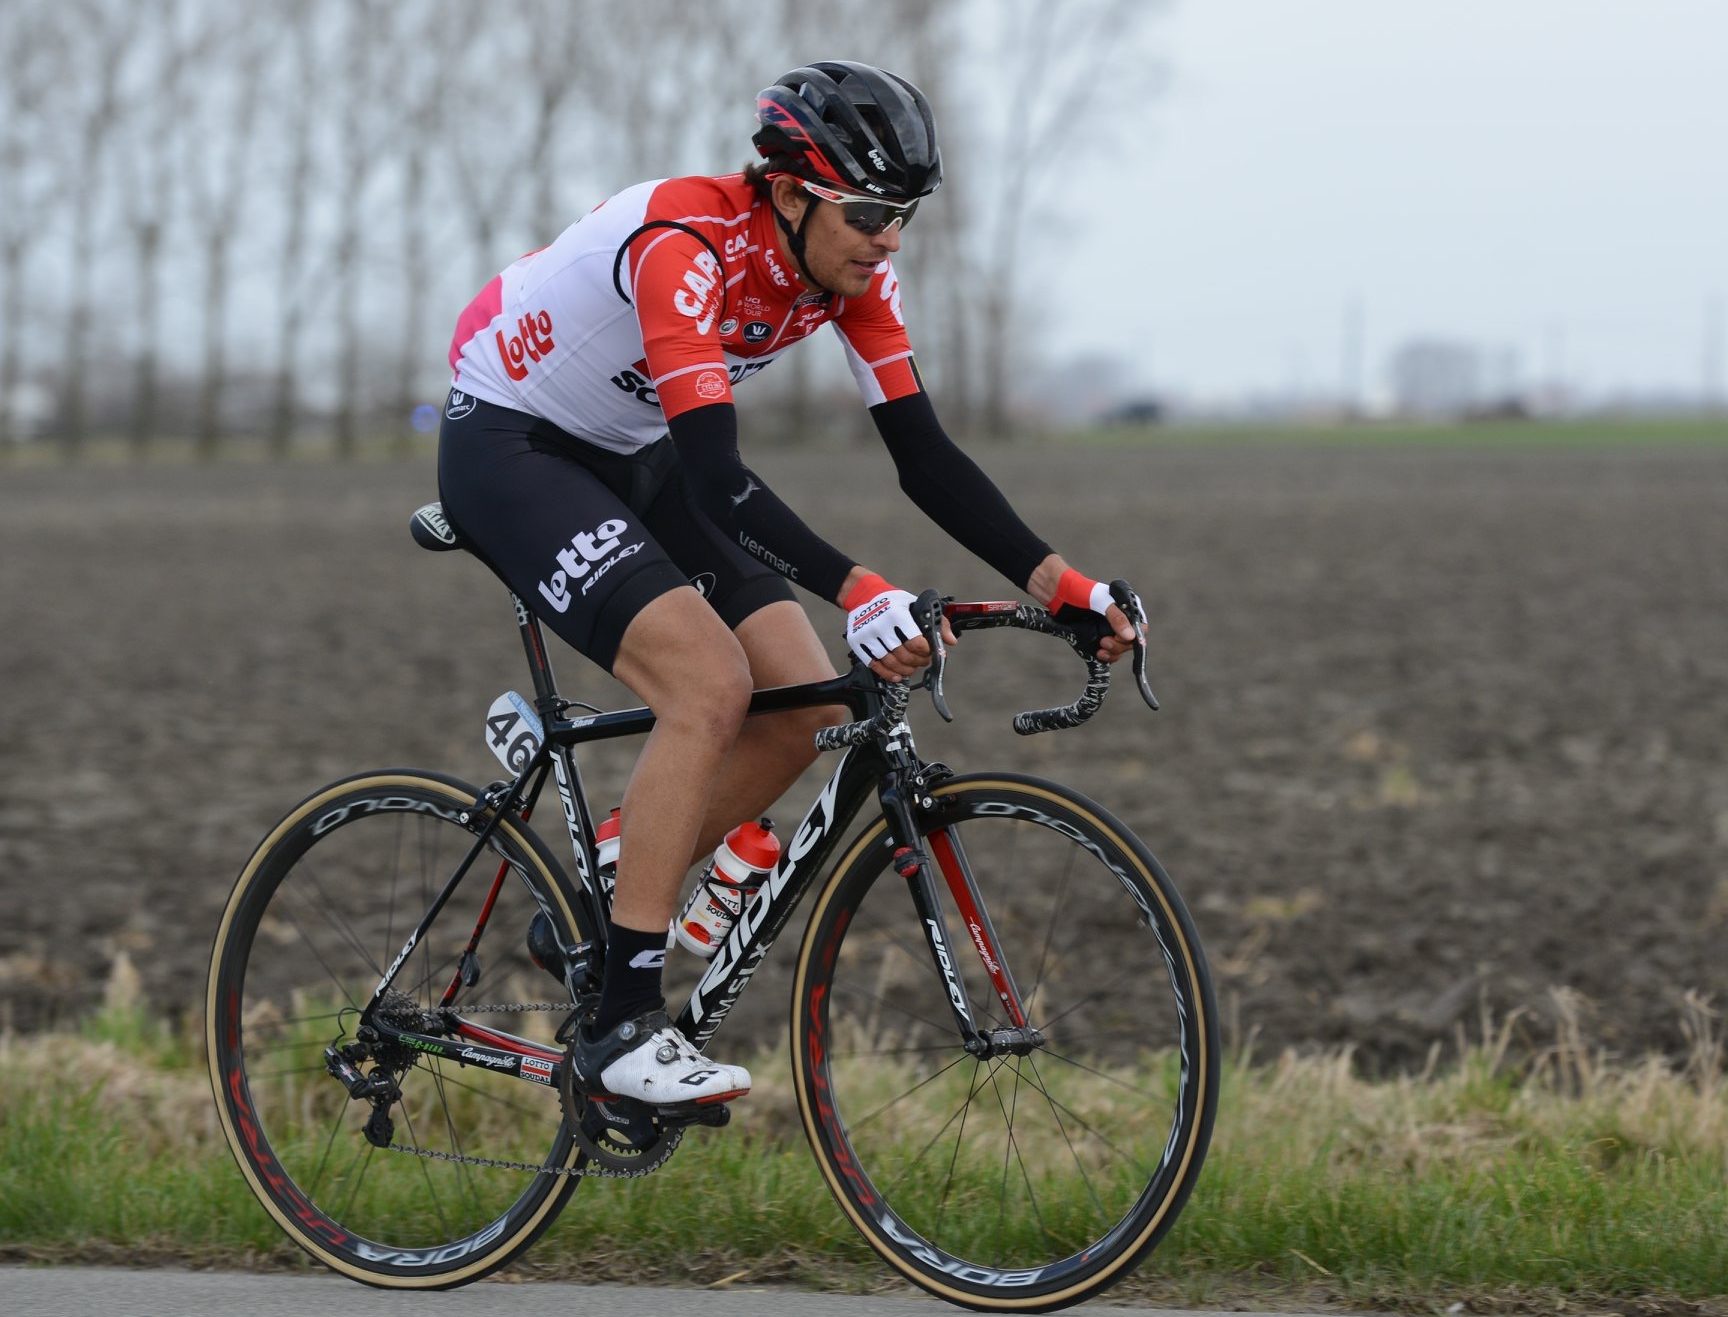 James shaw in the 2018 Lotto-Soudal team kit